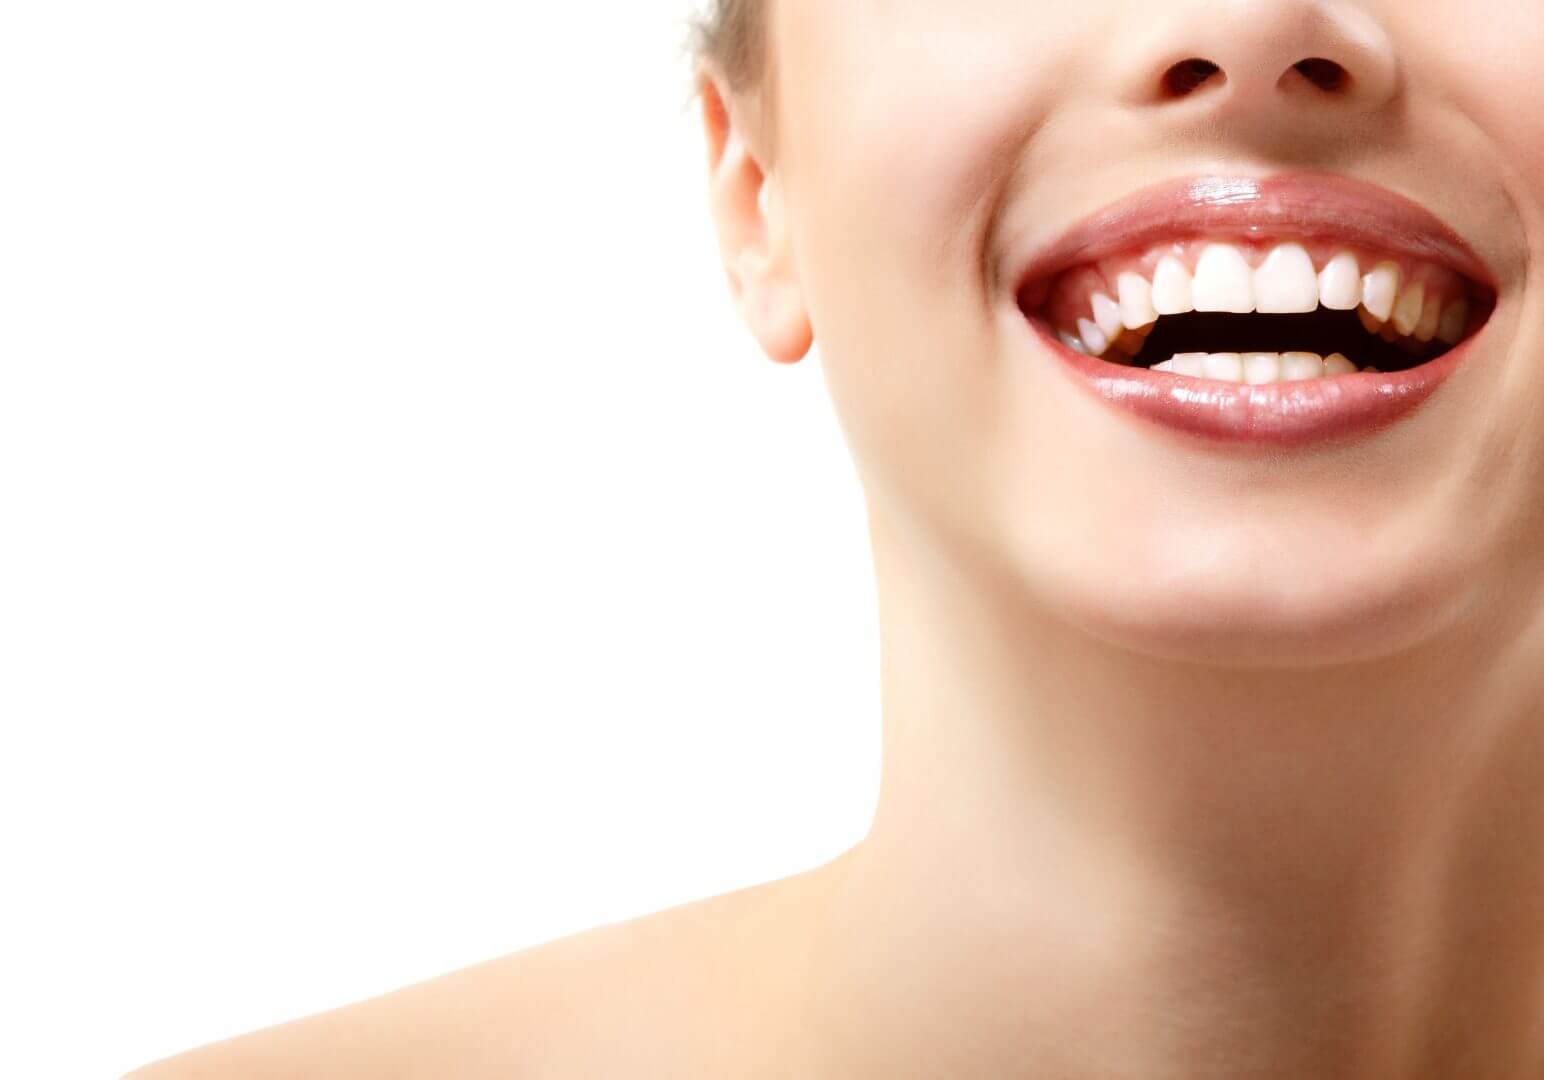 Is teeth whitening safe, or are there any potential risks or side effects?